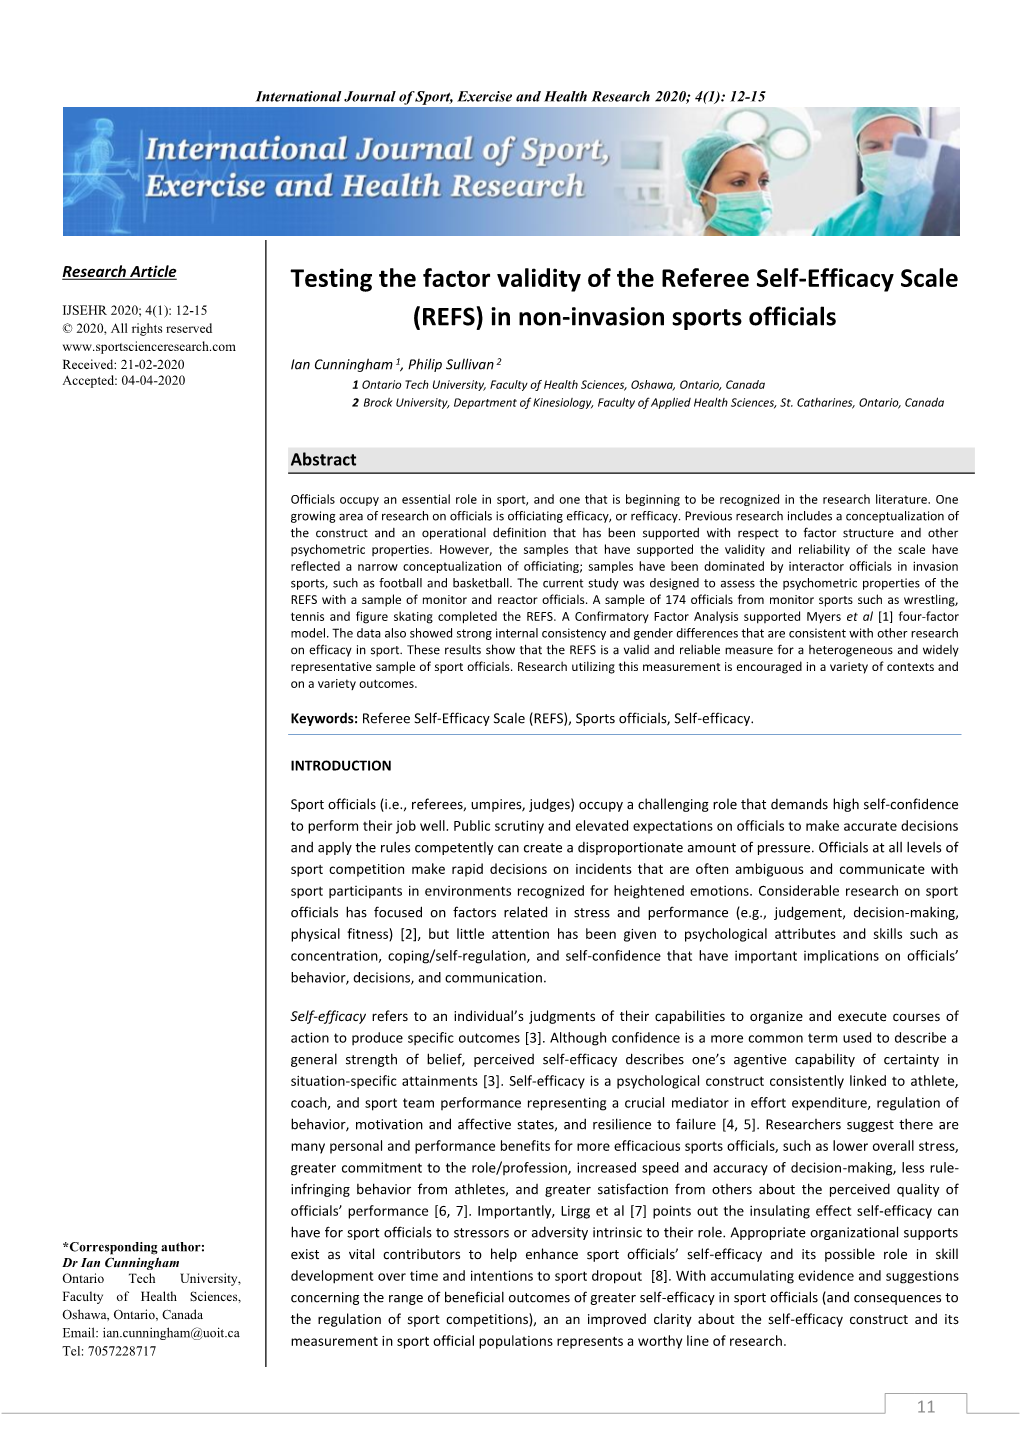 Testing the Factor Validity of the Referee Self-Efficacy Scale (REFS)